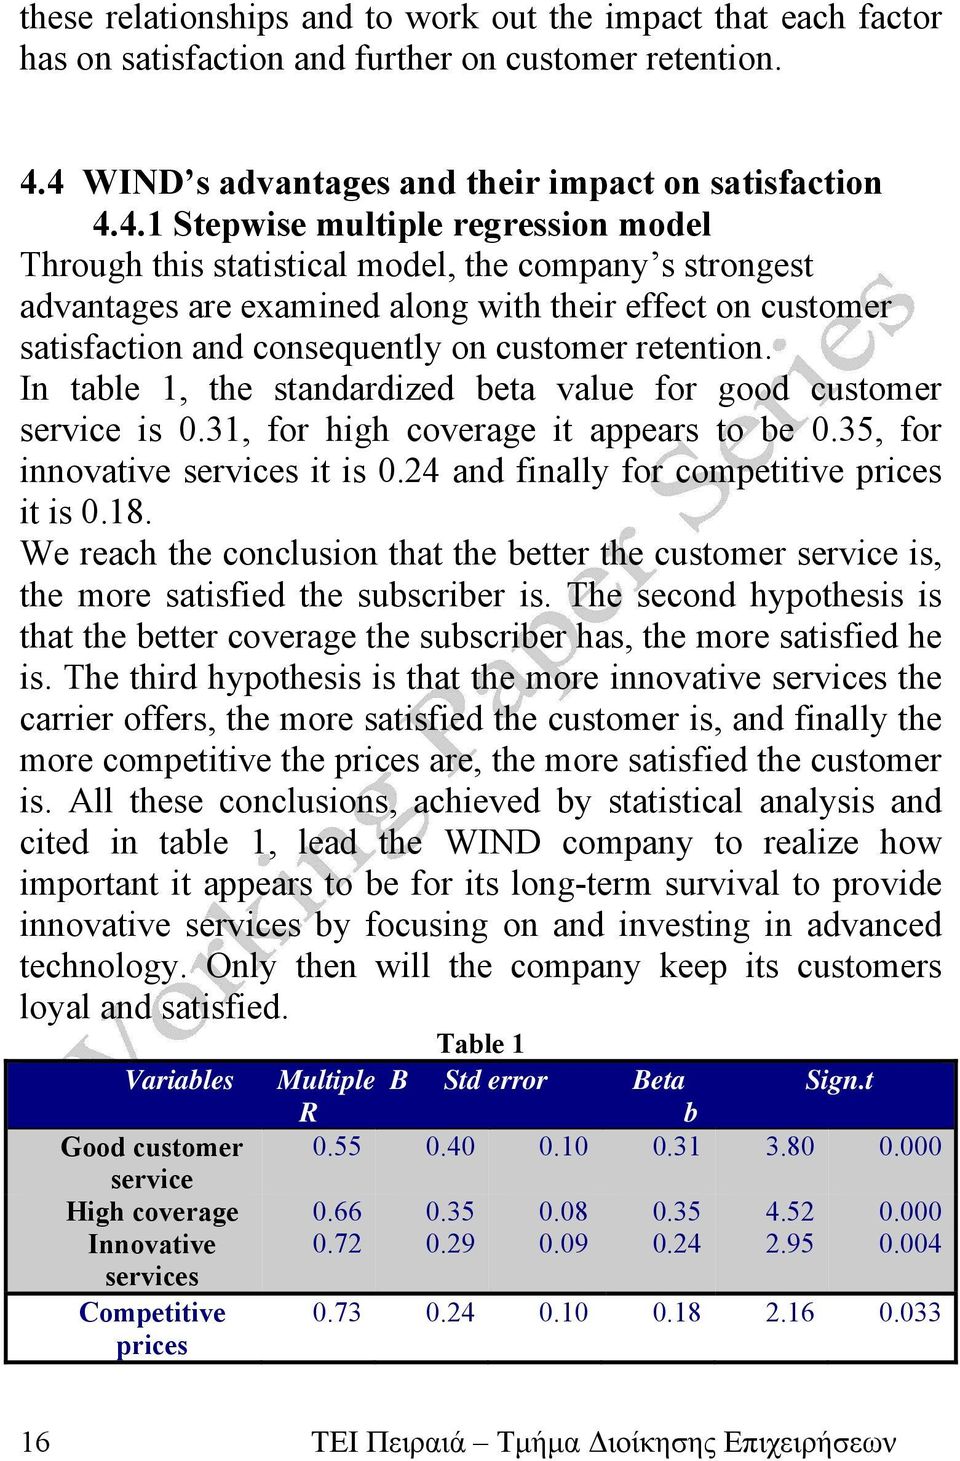 on customer satisfaction and consequently on customer retention. In table 1, the standardized beta value for good customer service is 0.31, for high coverage it appears to be 0.